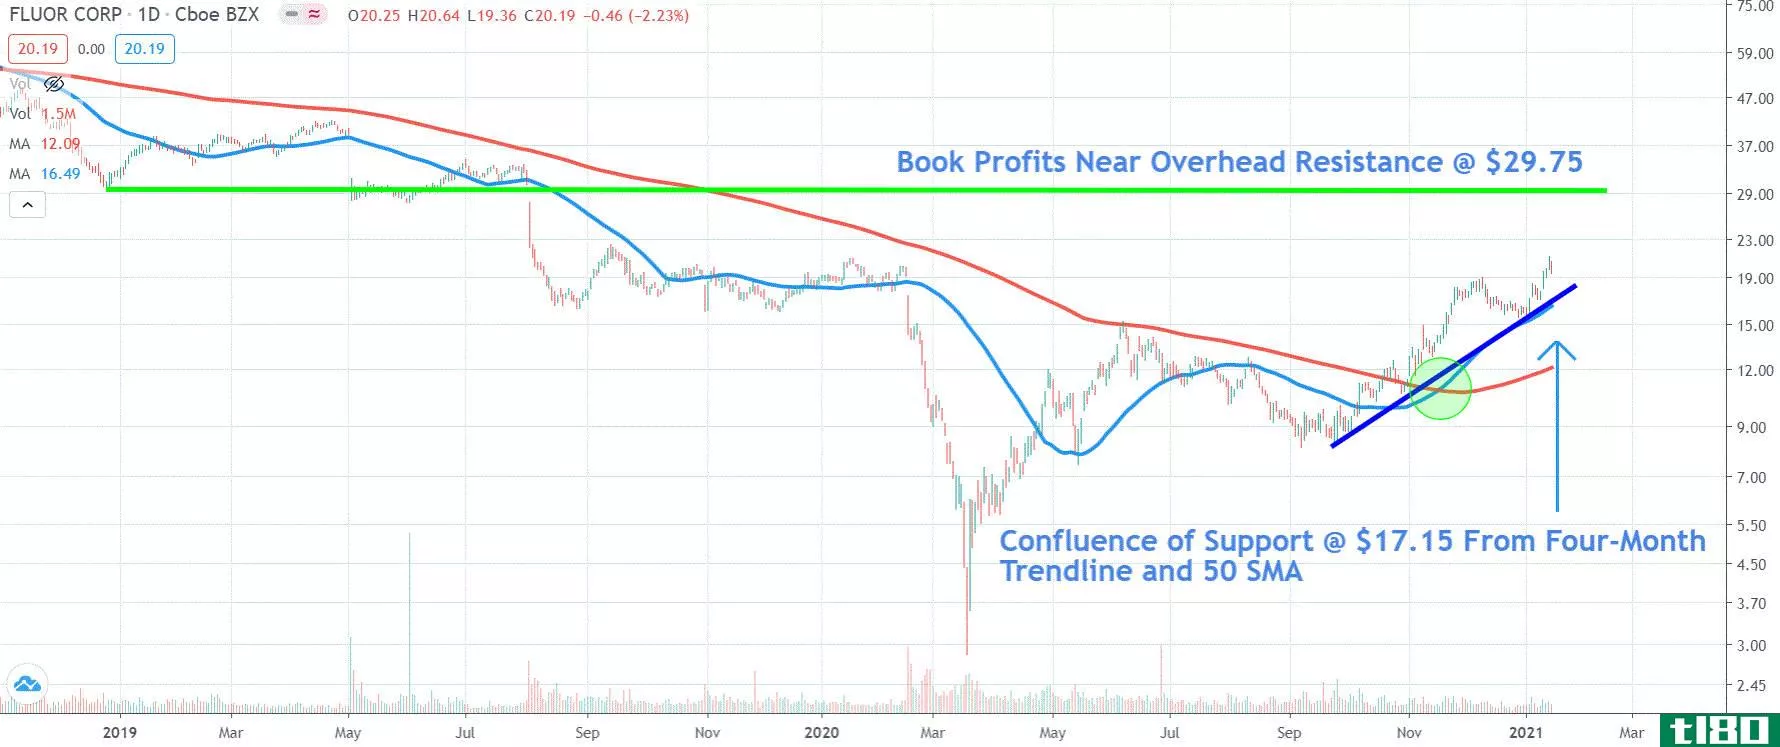 Chart depicting the share price of Fluor Corporation (FLR)